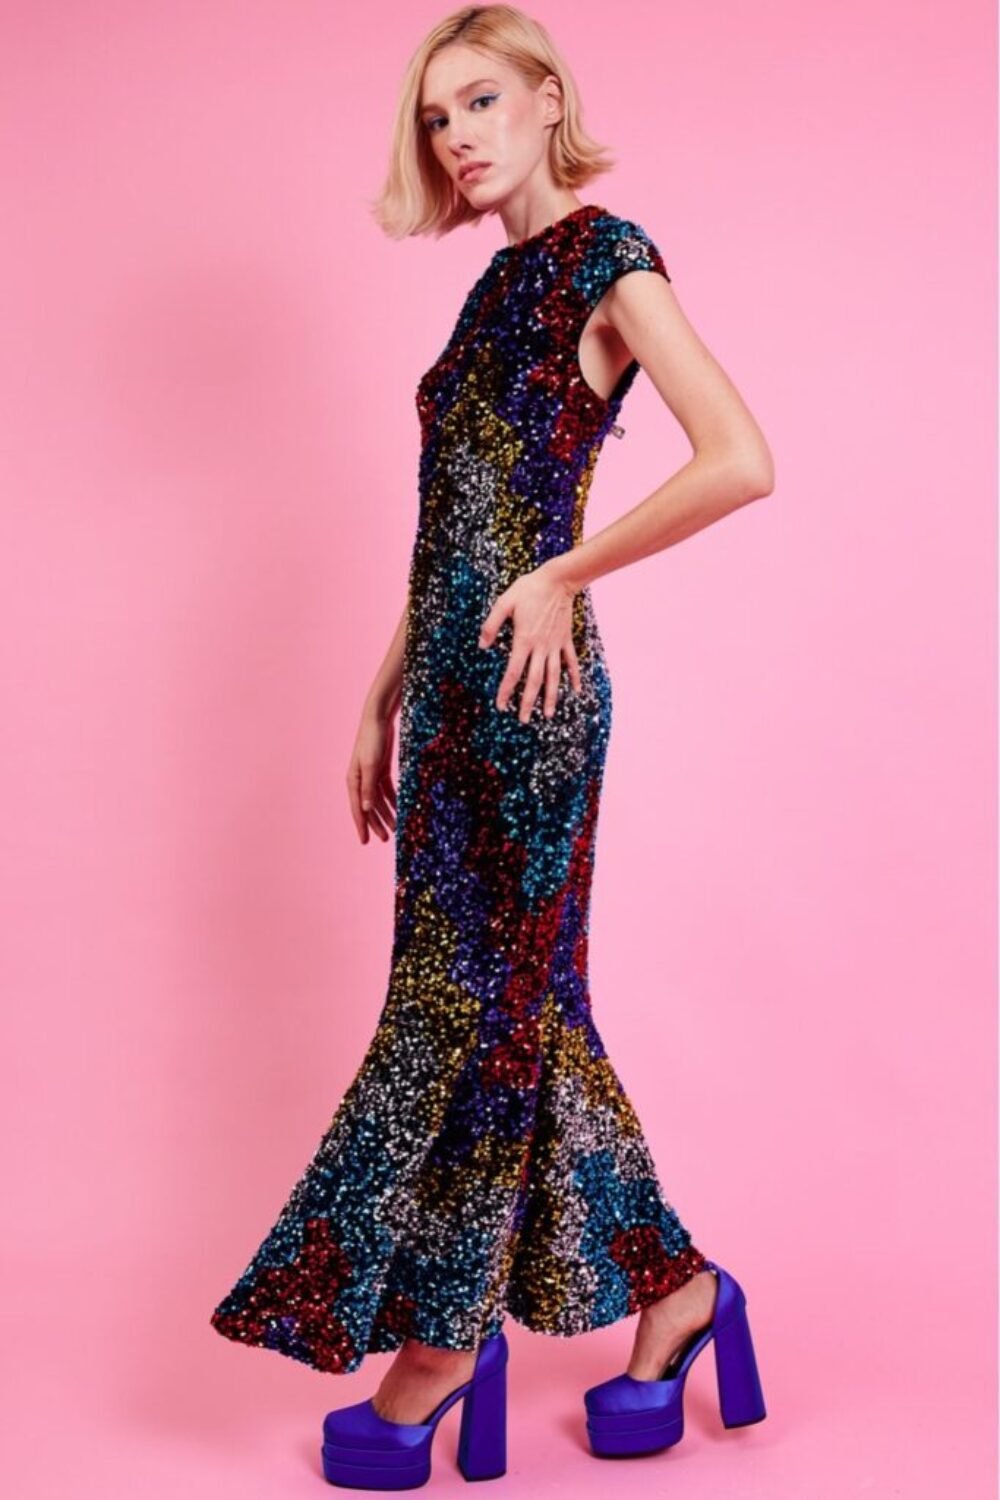 Shop Lux Multi Sequin Fish Tail Maxi Dress and women's luxury and designer clothes at www.lux-apparel.co.uk